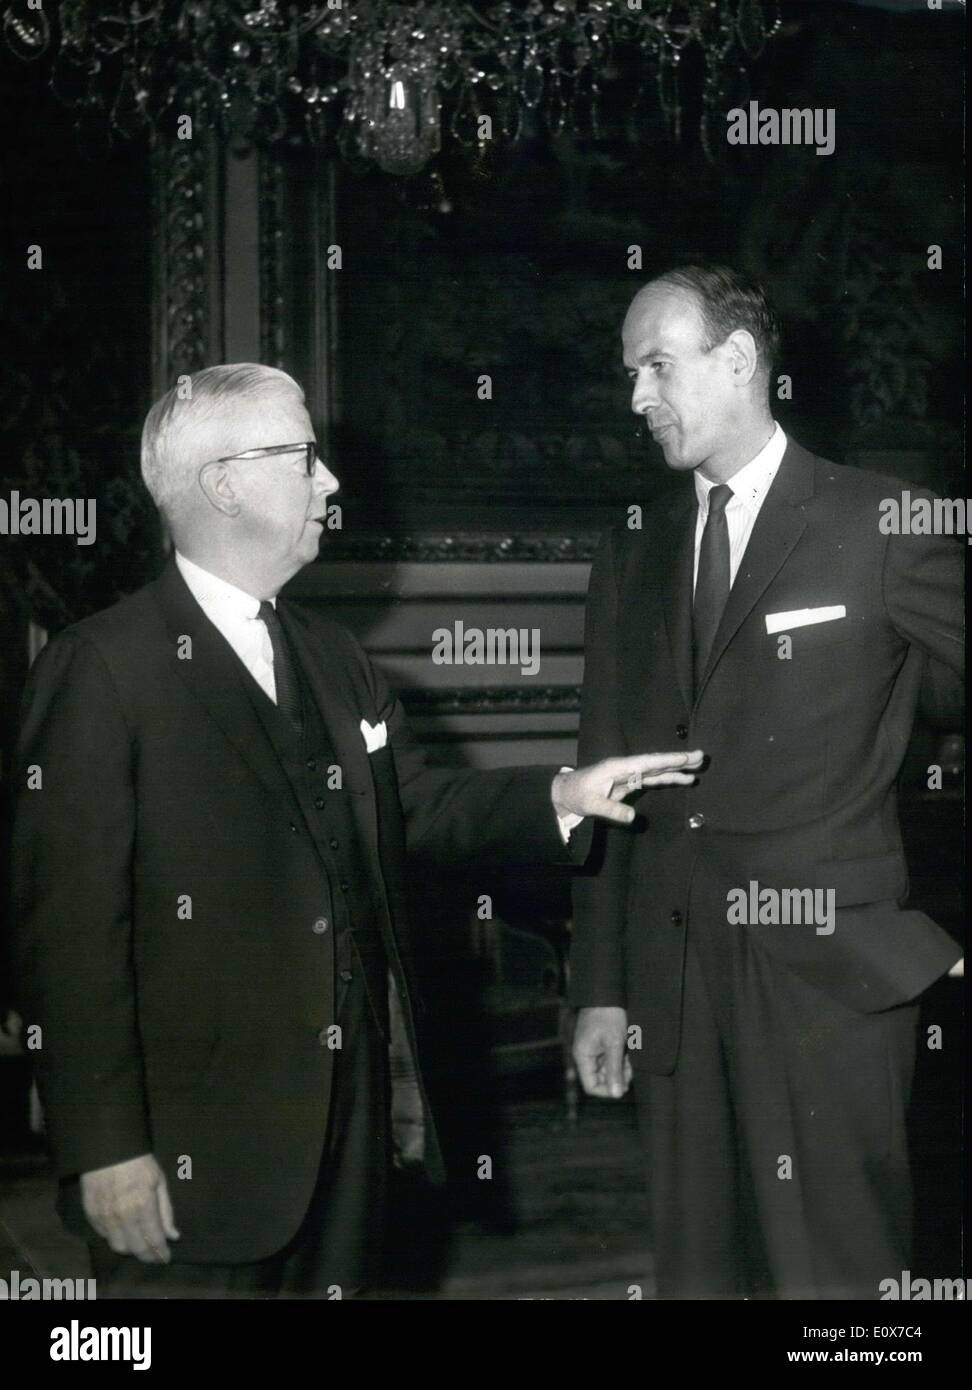 Aug. 30, 1965 - Henry Fowler with Giscard d'Estaing in Paris Stock Photo